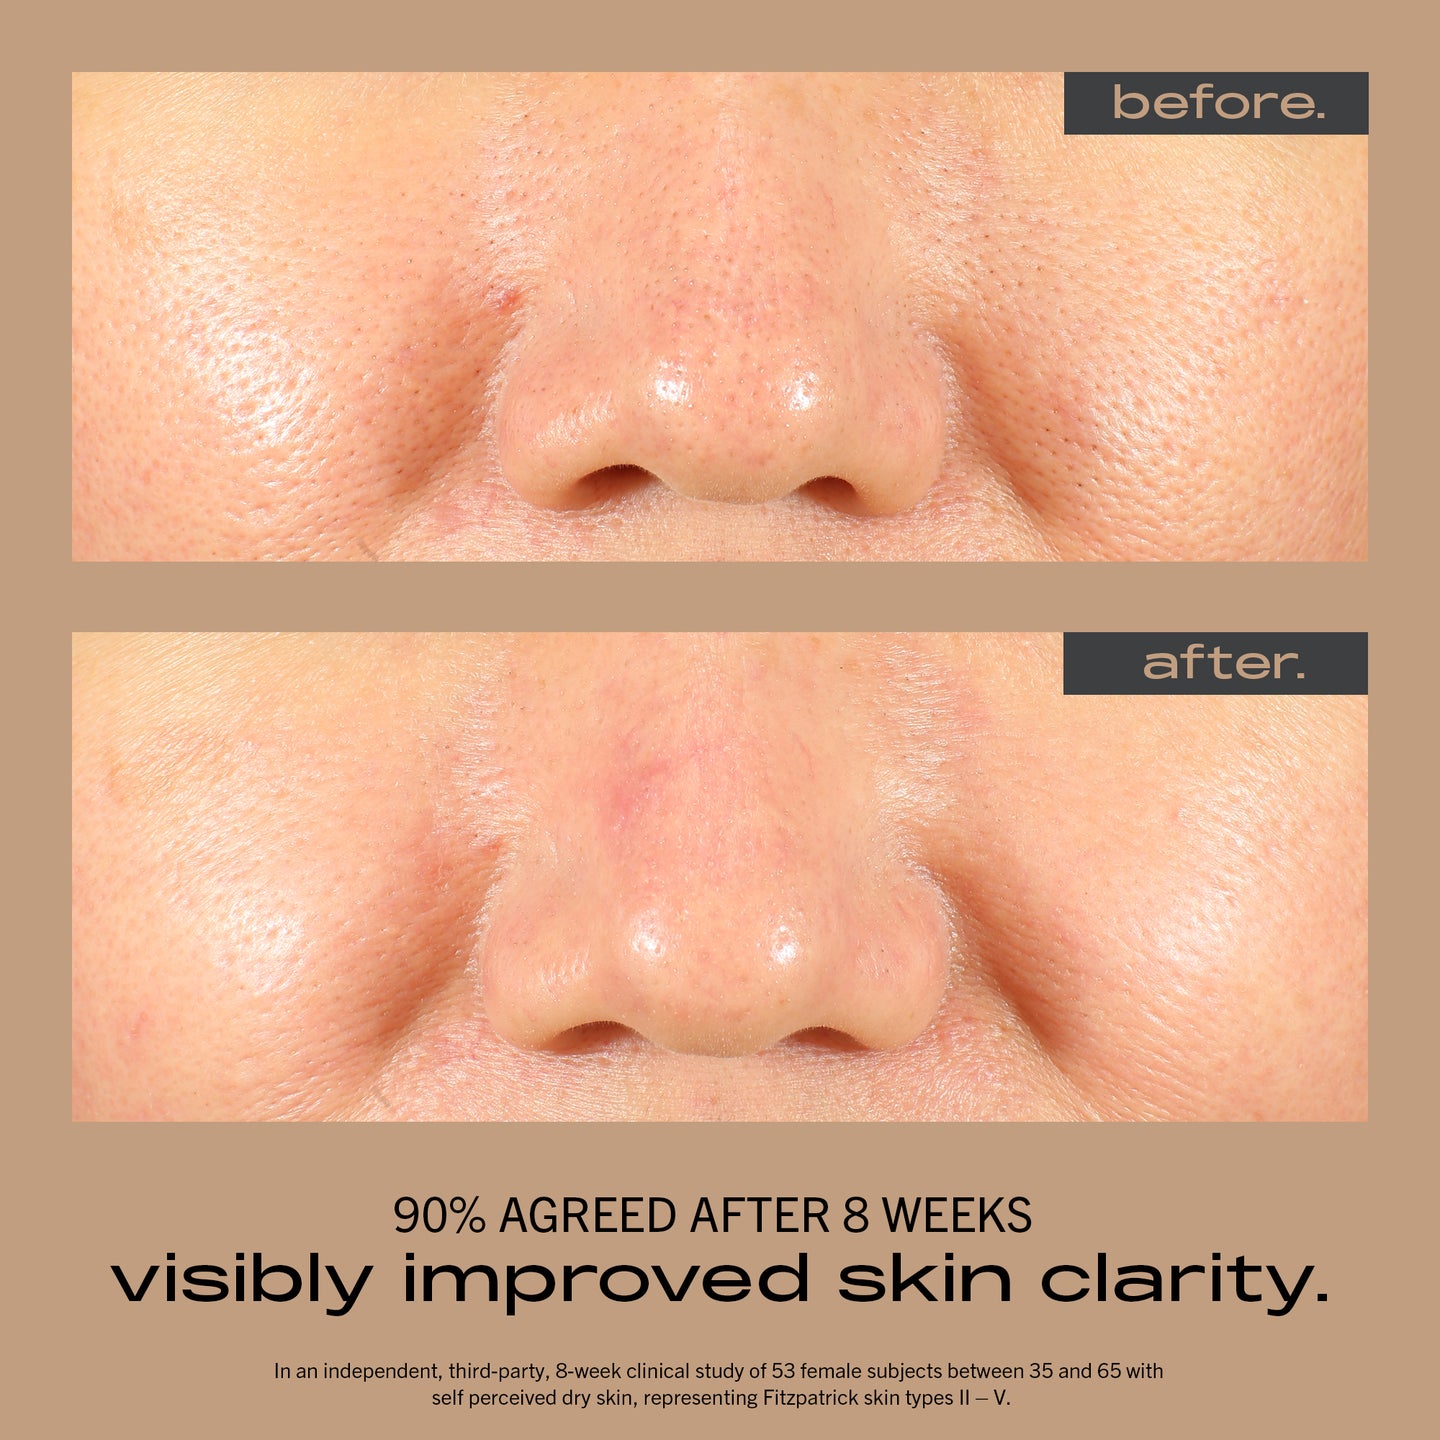 MATTER OF FACT SKINCARE RESURFACING AND HYDRATING SERUM image of face before and after using